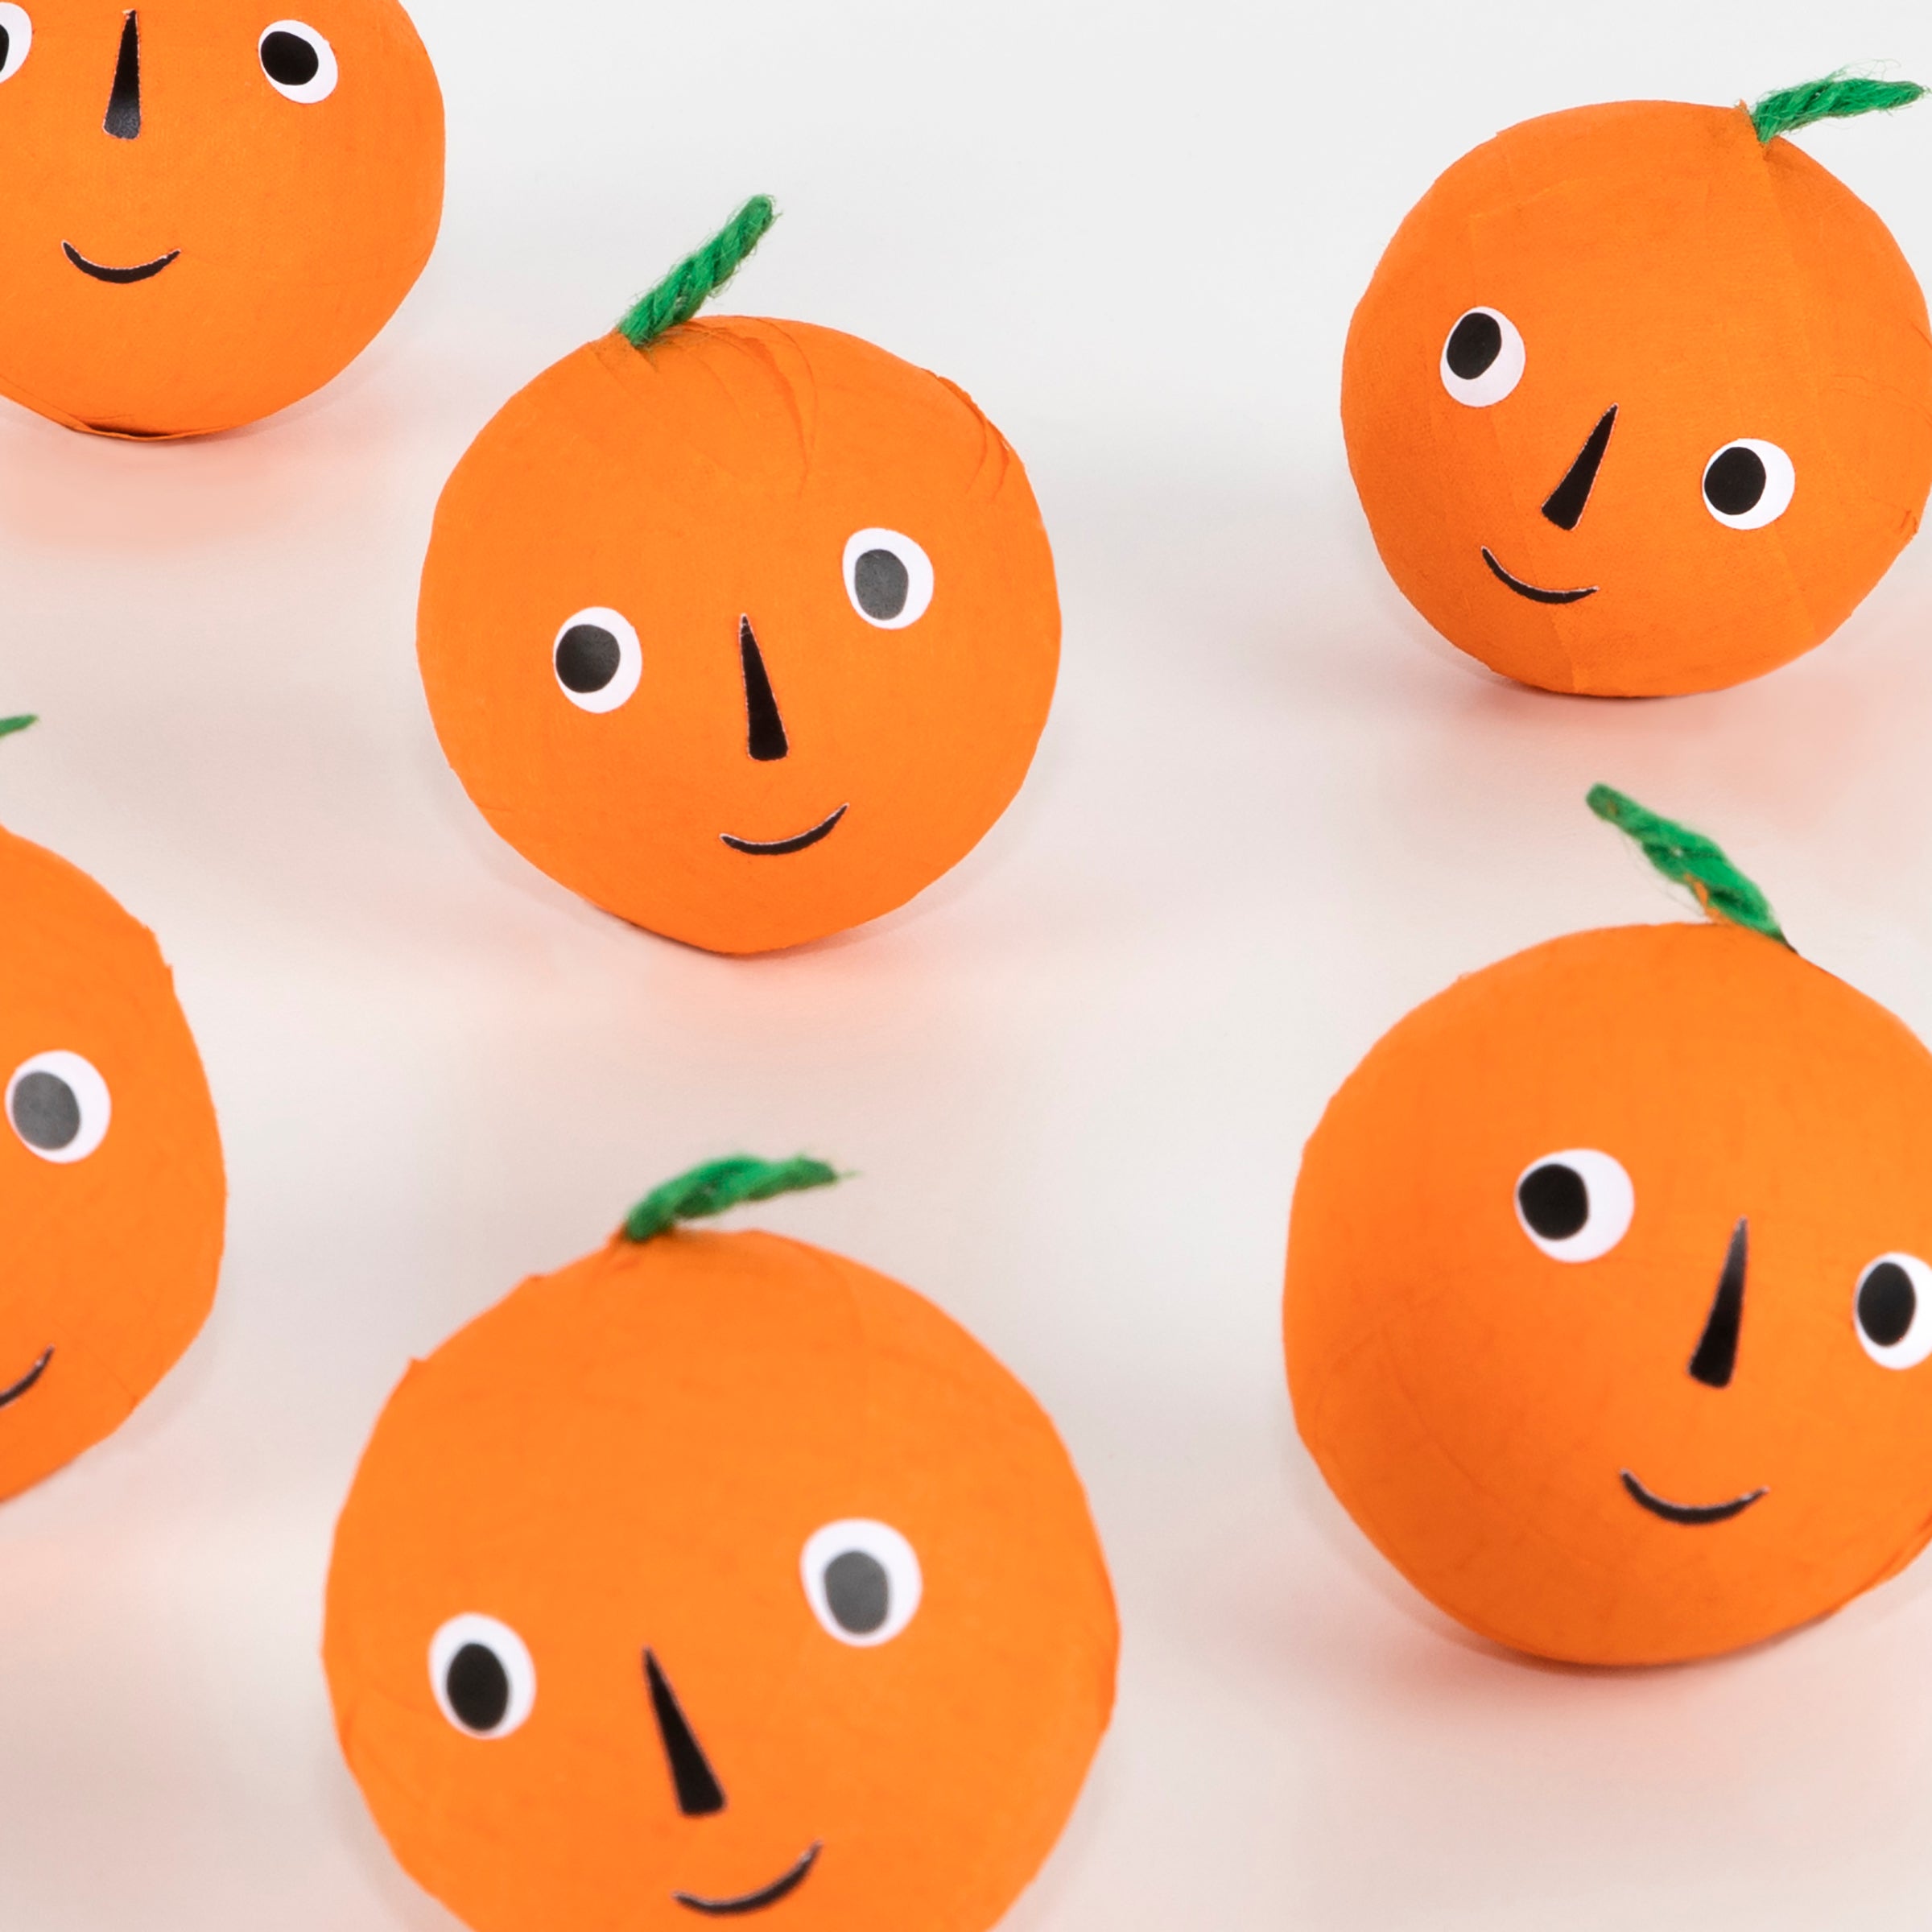 These surprise balls, in the shape of pumpkins, make the perfect Halloween gifts for kids.